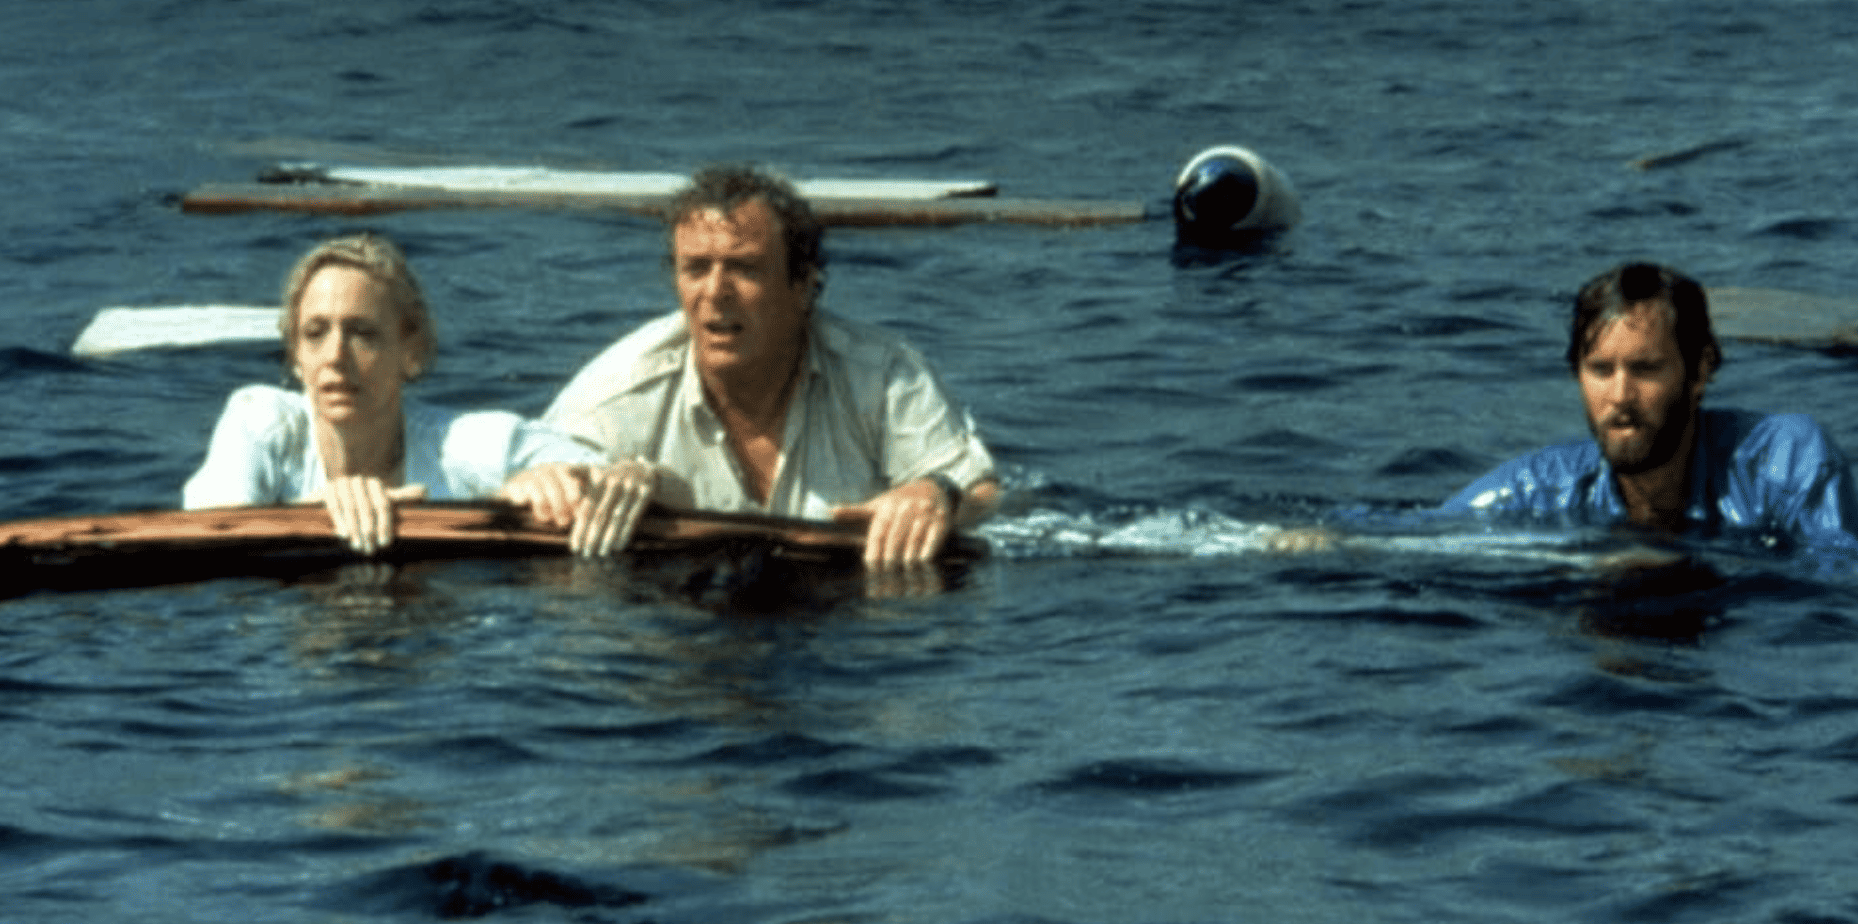 Lorraine Gary, Michael Caine, and Lance Guest swimming adrift in this image from Universal Pictures.